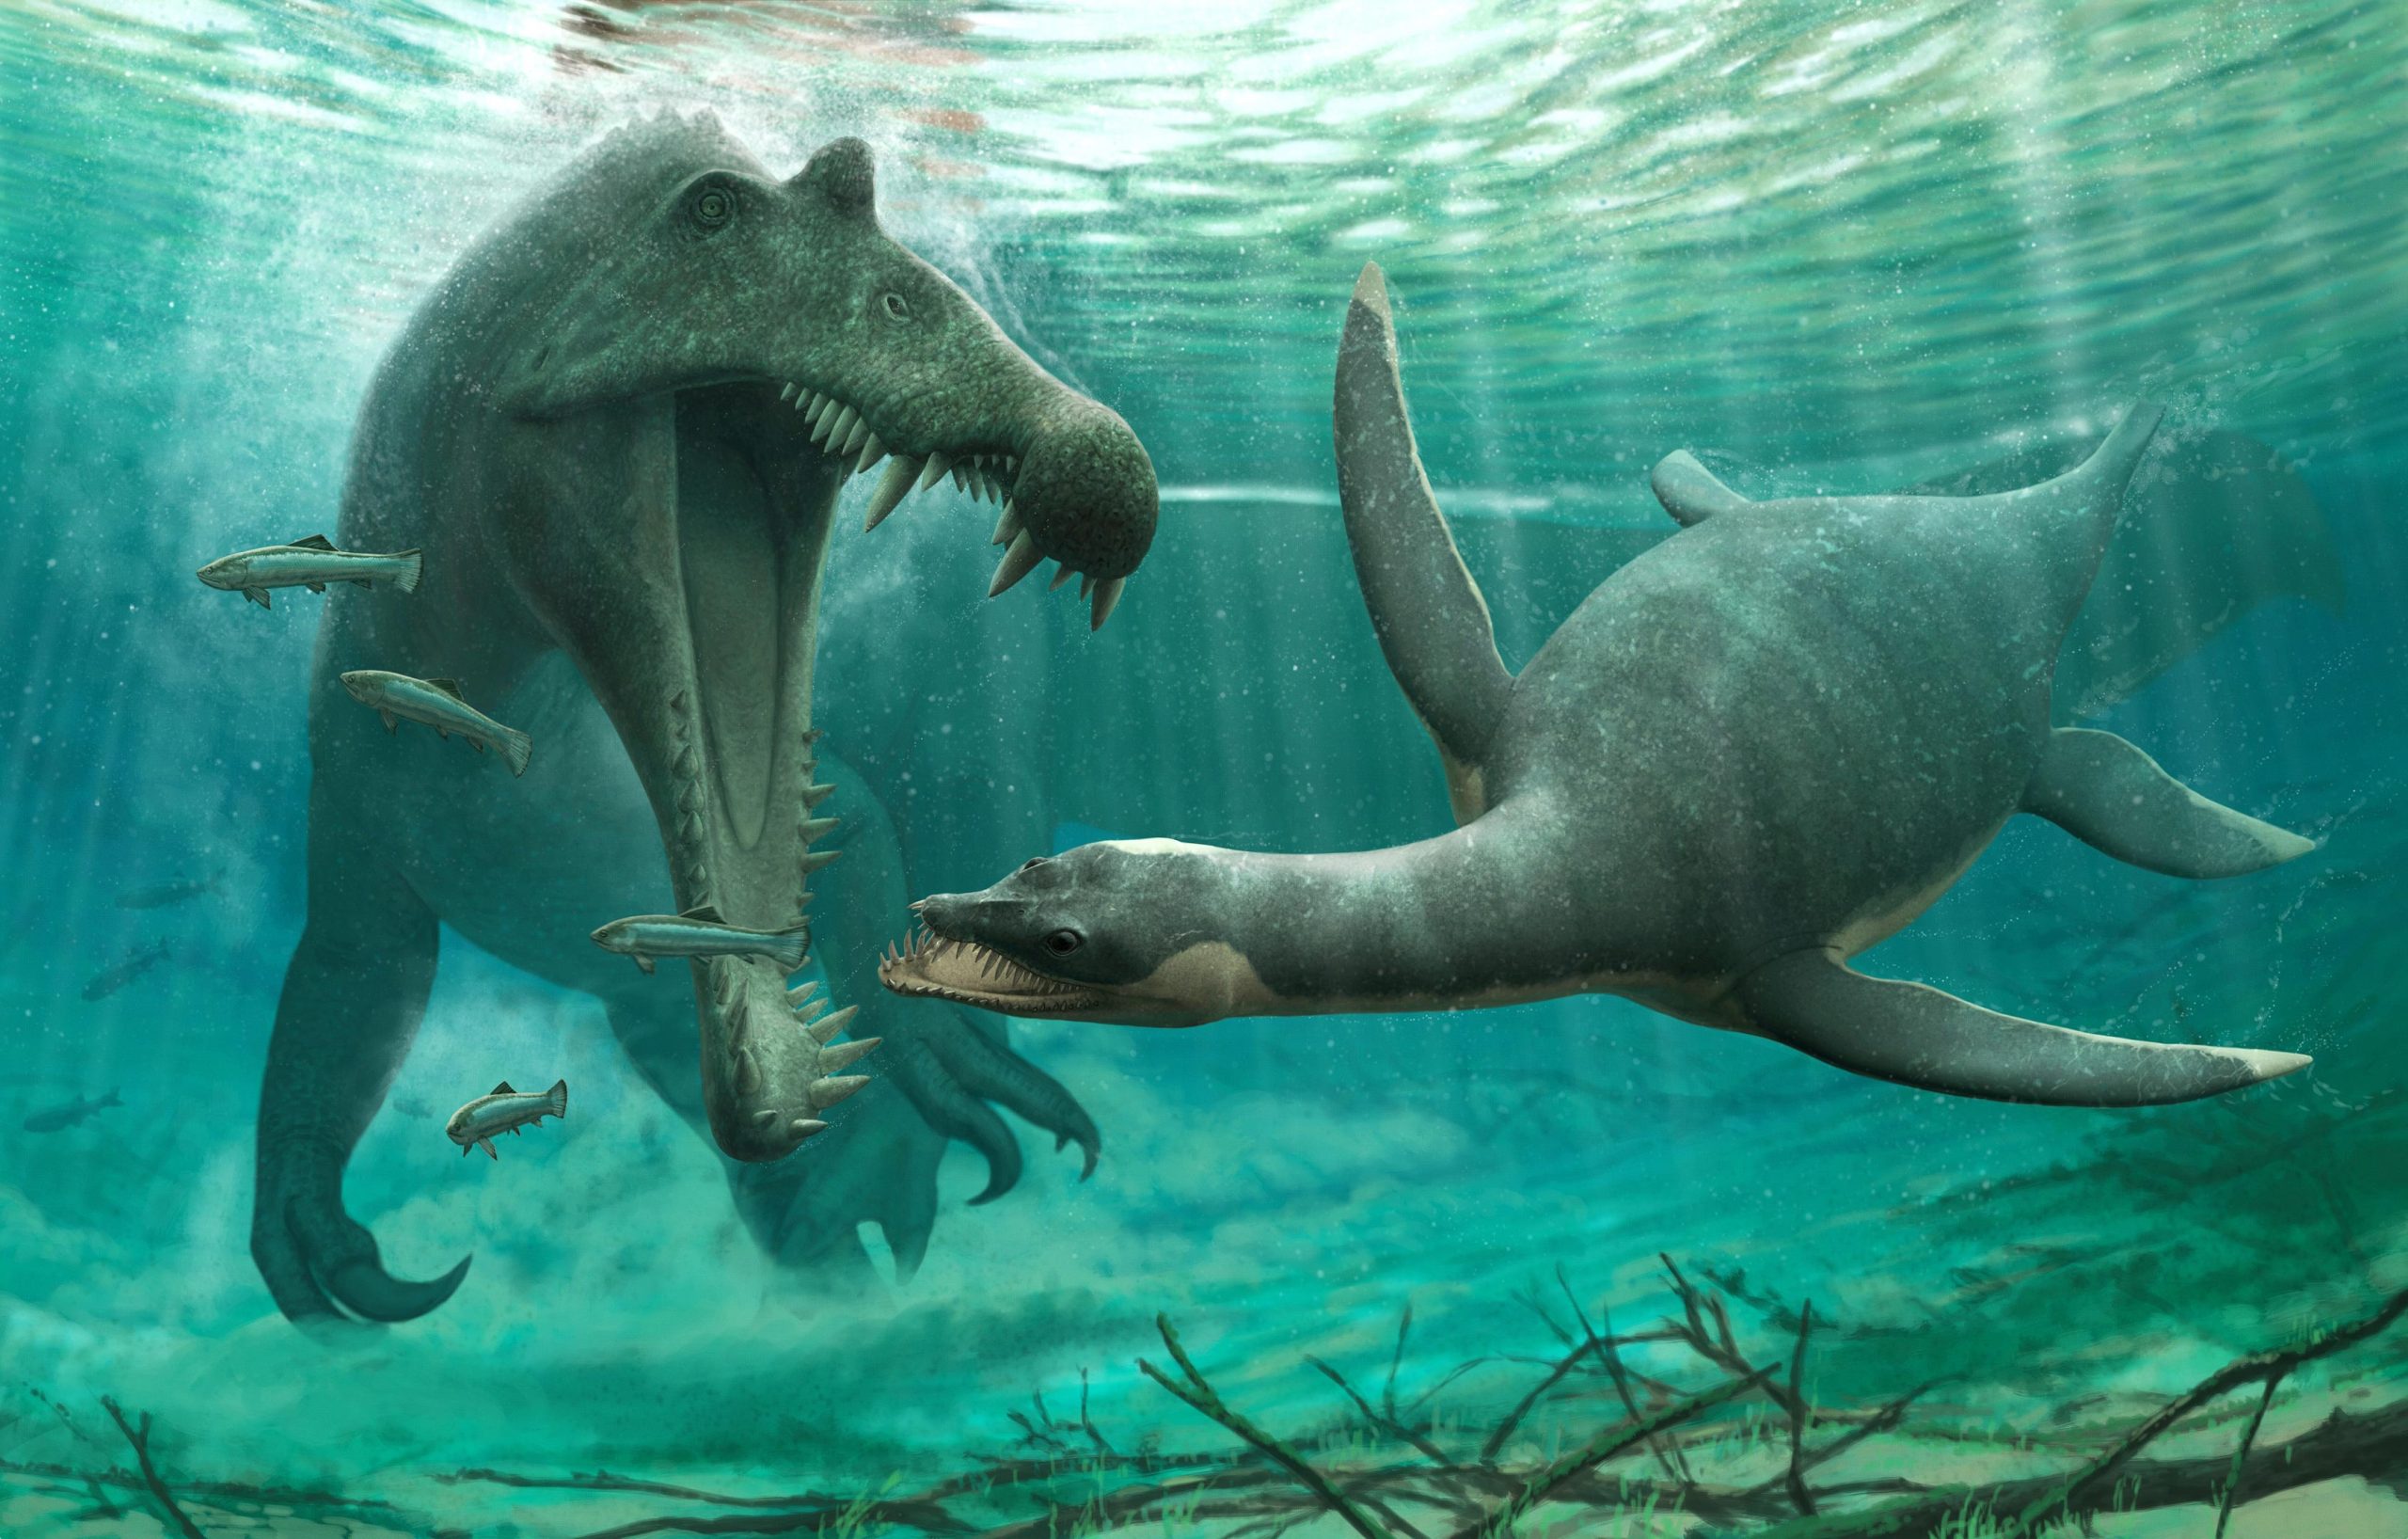 New Plesiosaur Fossil Discovery – What It Means for the Loch Ness Monster